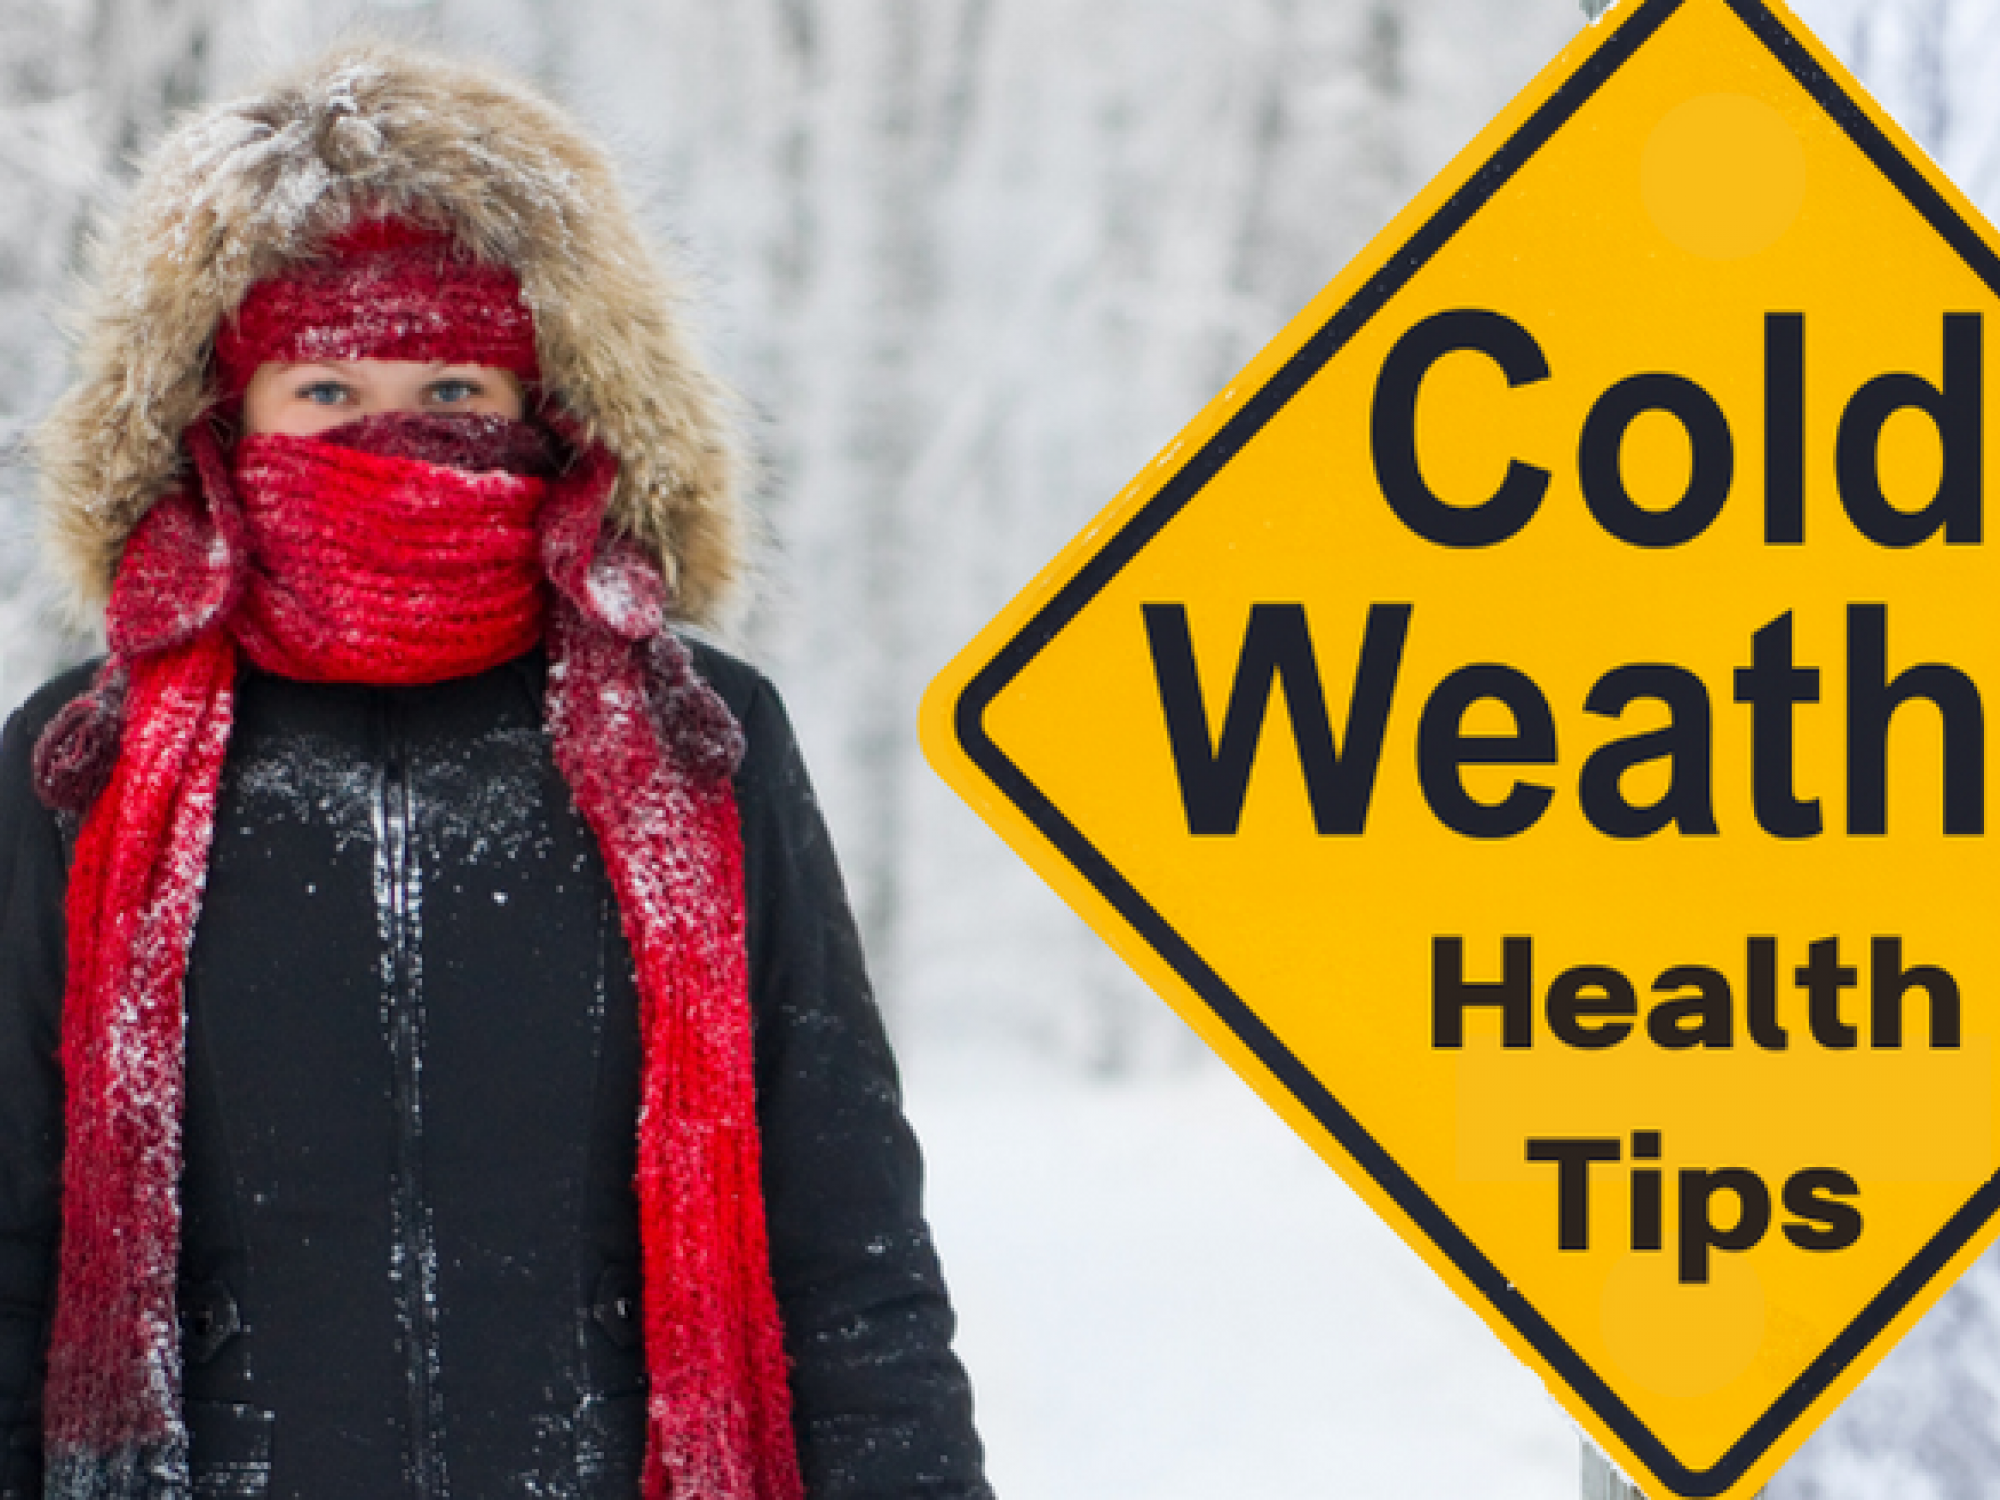 Cold and Wind Chills are very Dangerous, Protect from Frostbite